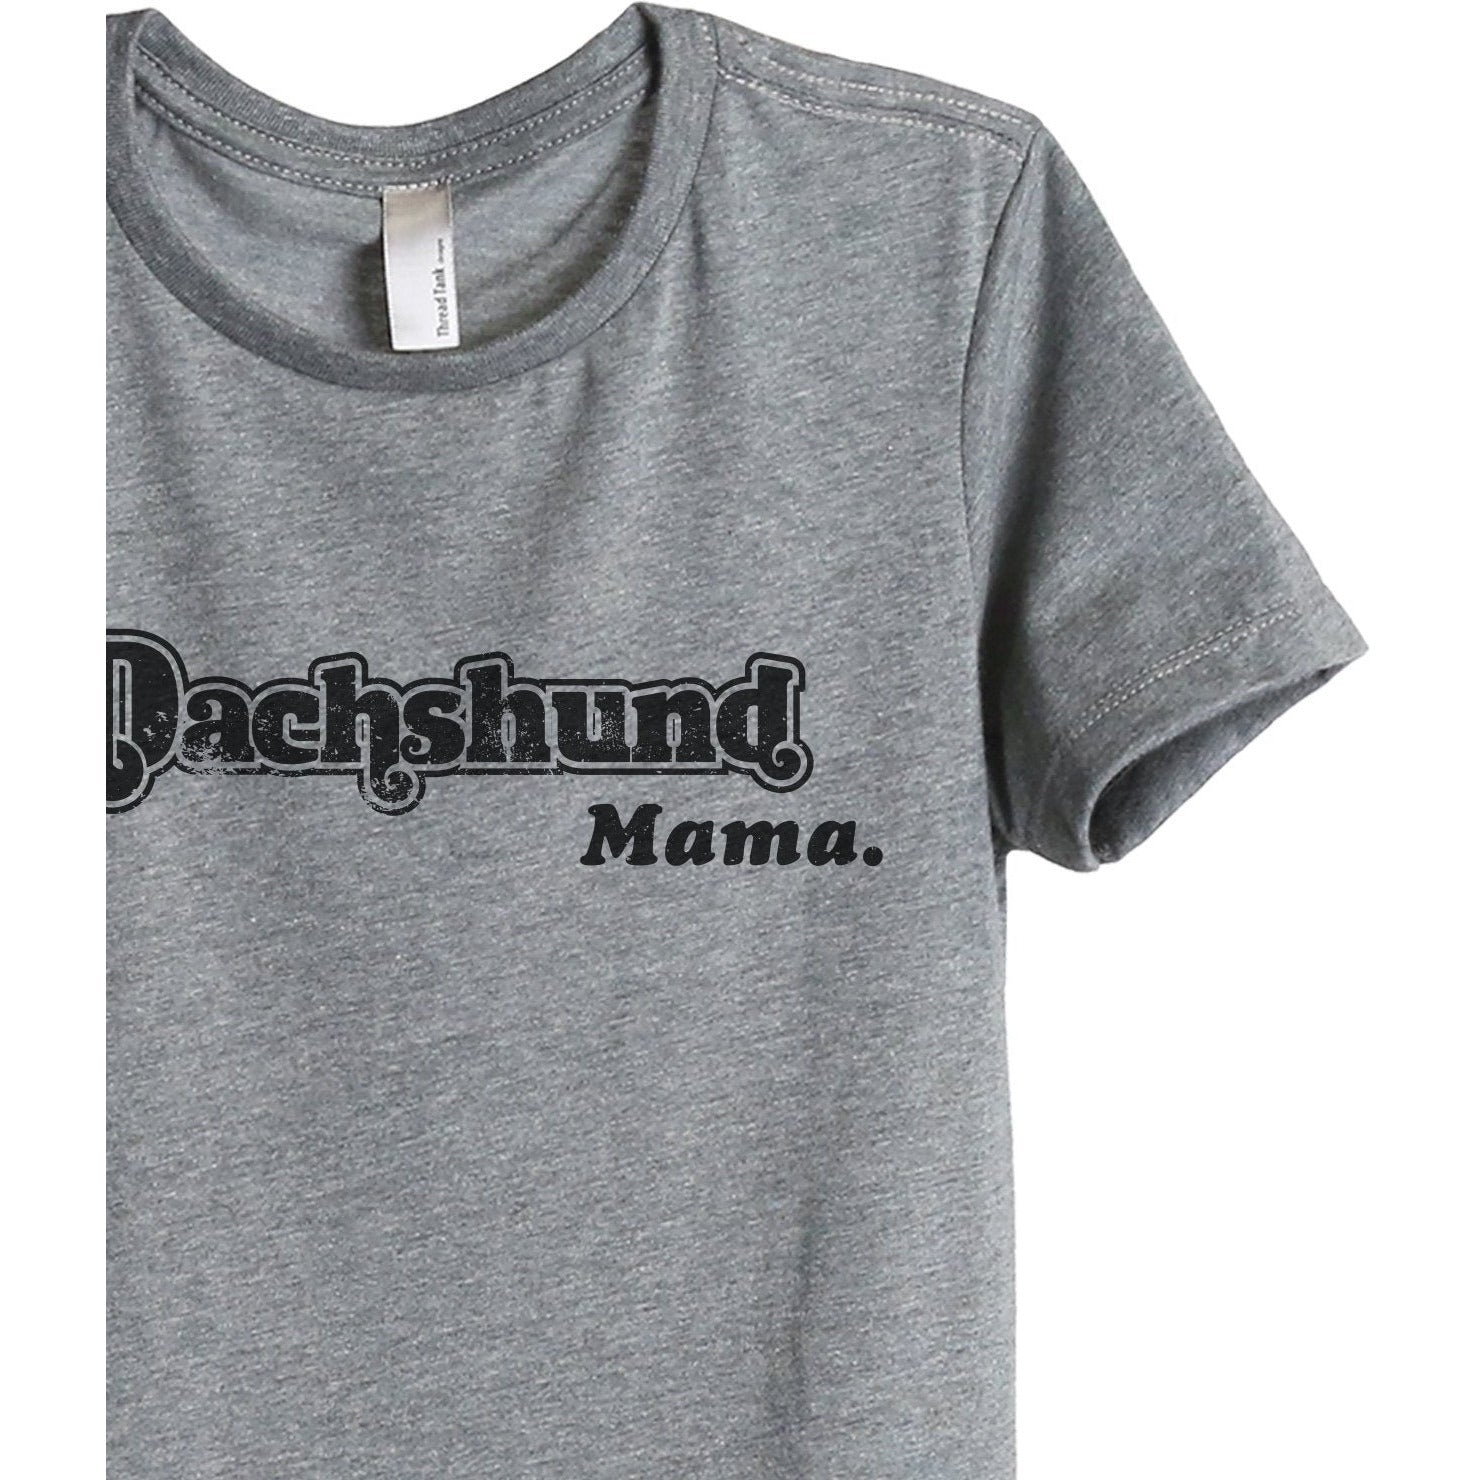 Dachshund Mama Women's Relaxed Crewneck T-Shirt Top Tee Heather Grey Zoom Details
